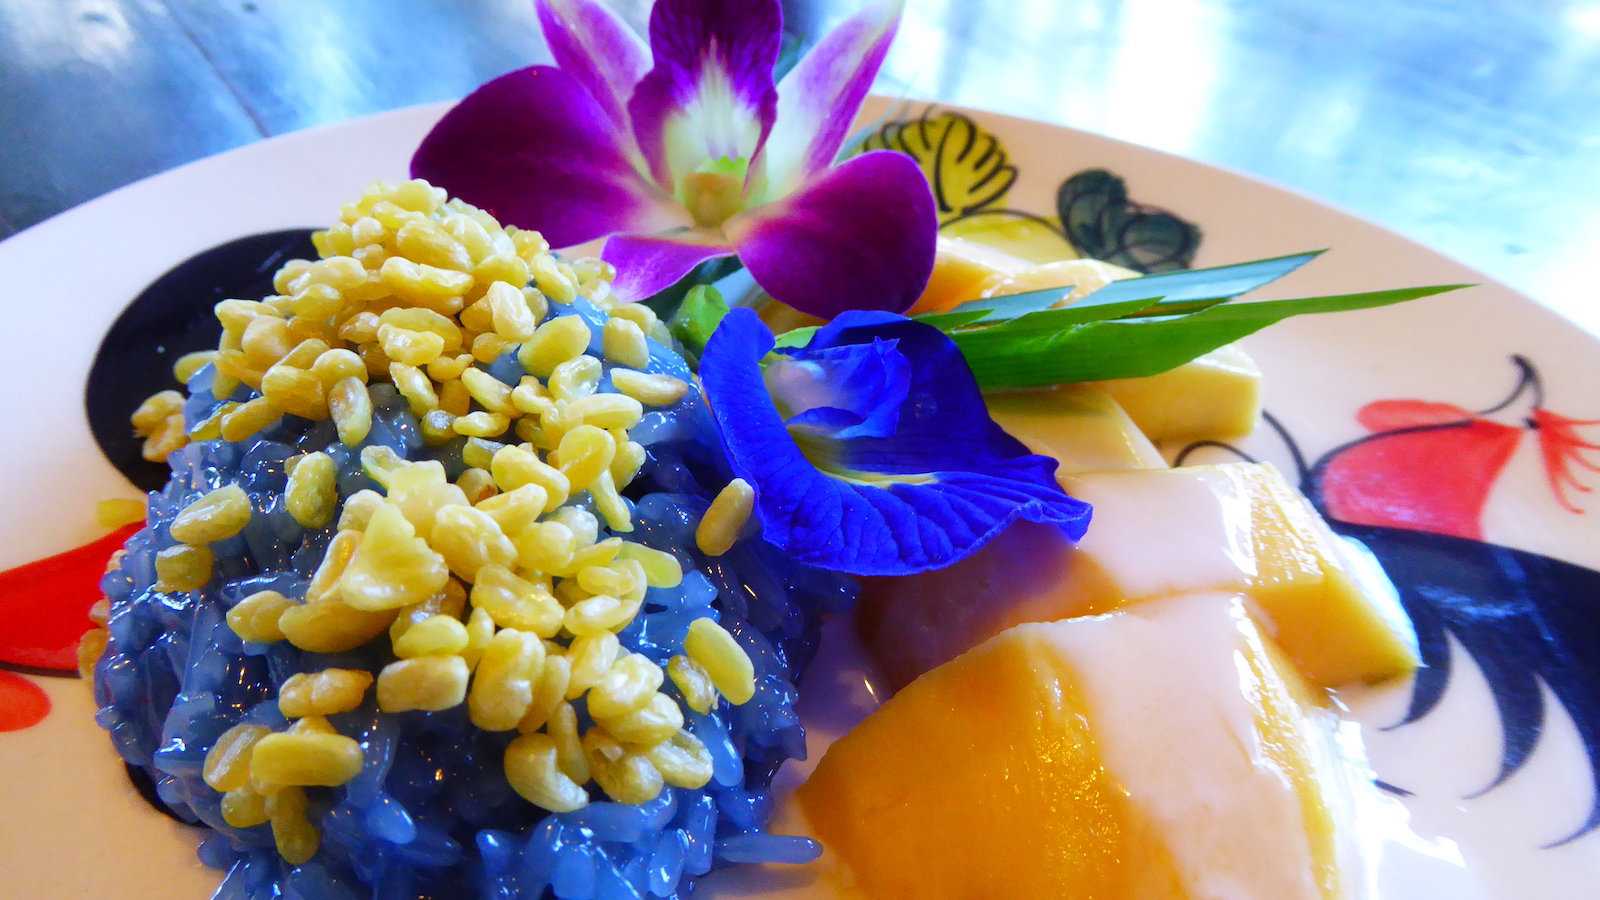 One of the most popular desserts in Thailand is the simple mango with sticky rice dish